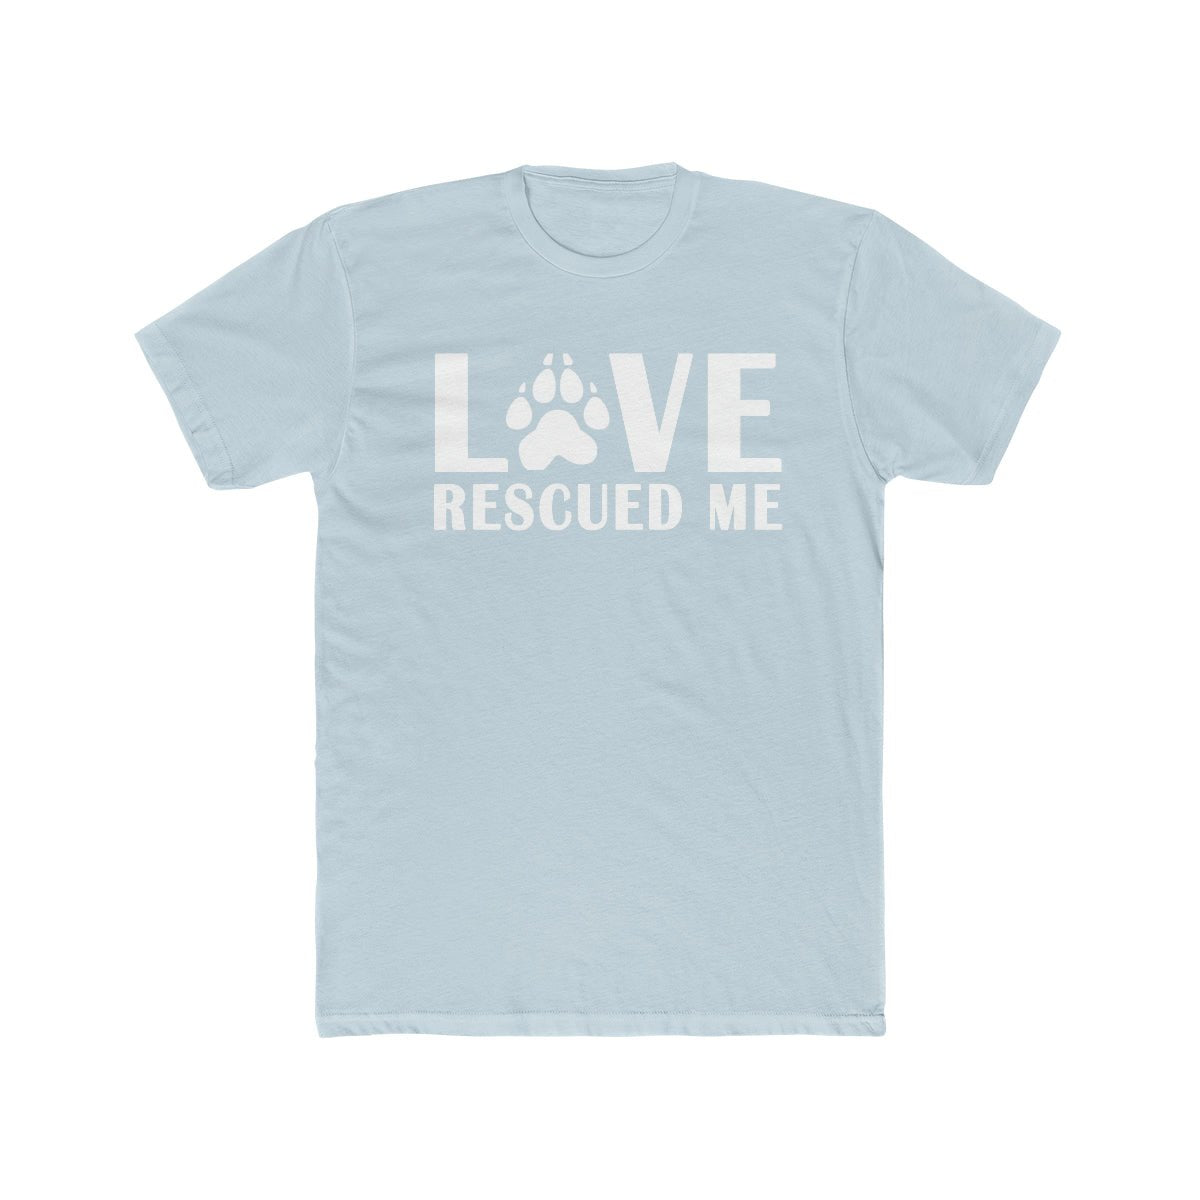 Love Rescued Me Shirt | Dog Lover's Tee Shirt | Perfect gift for the dog lover in your family! | Multiple Colors Available